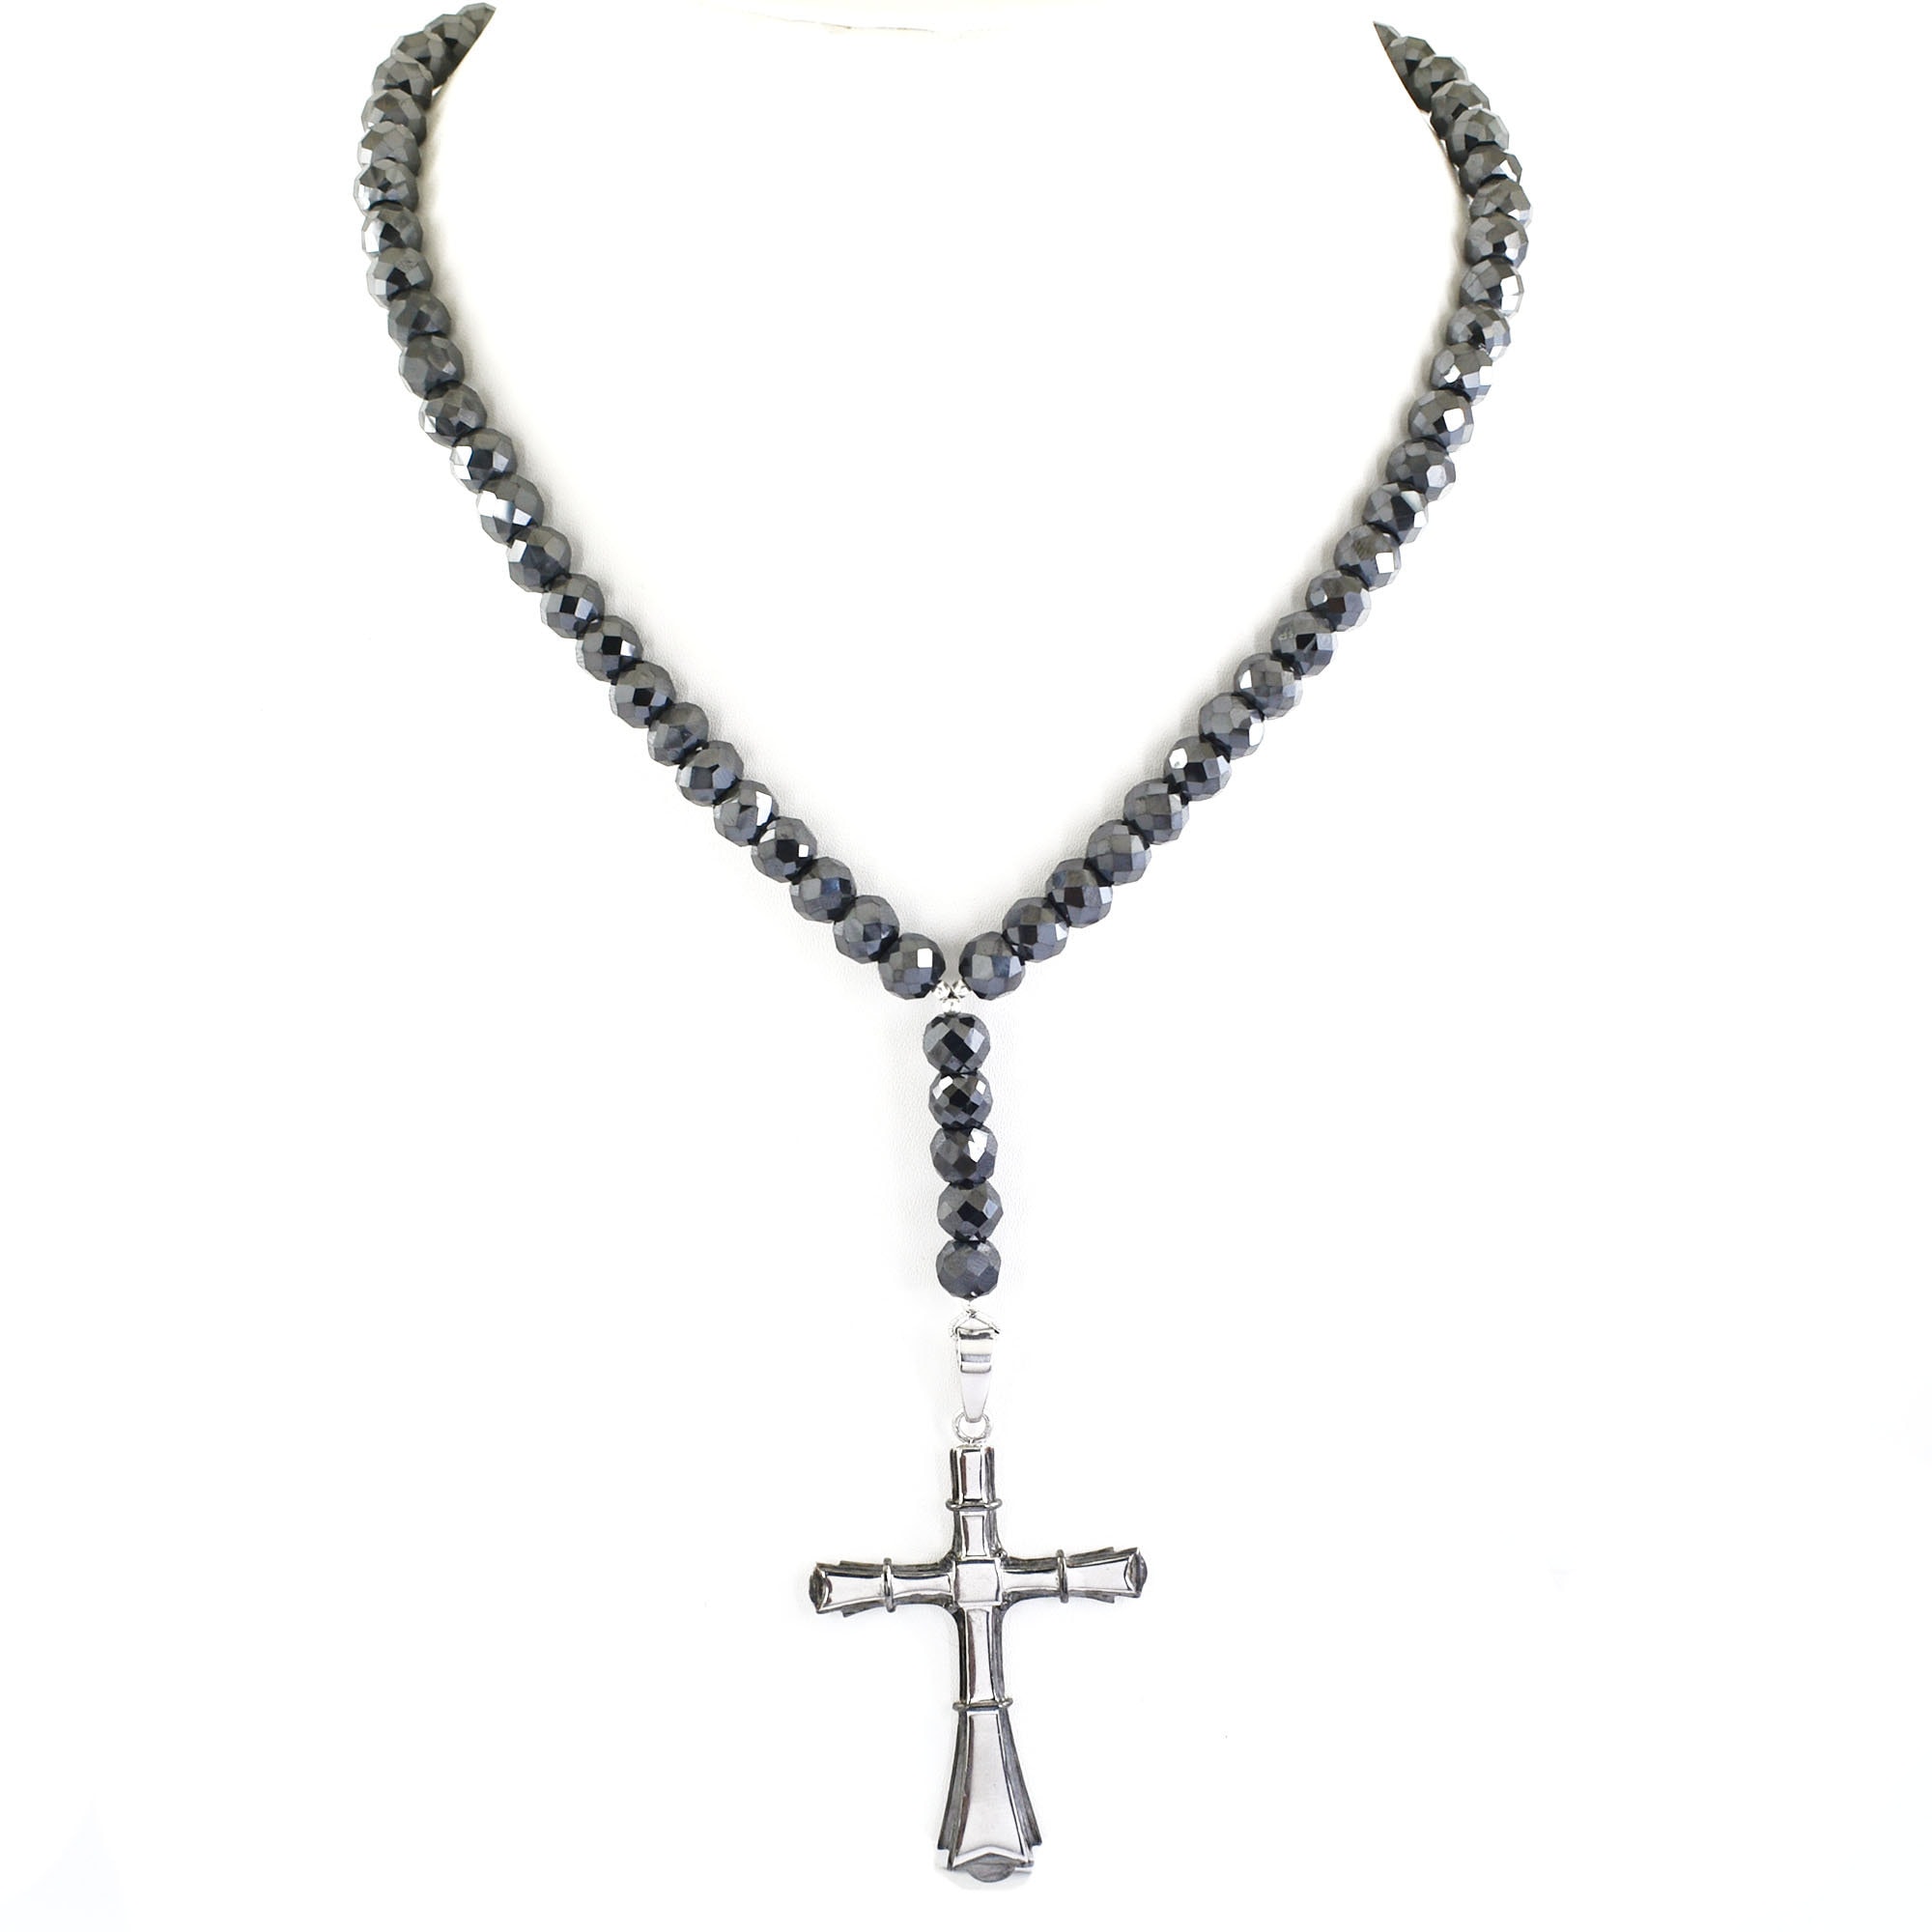 Glass Beads Thread Rosary with Metal Crucifix - Black – Living Words